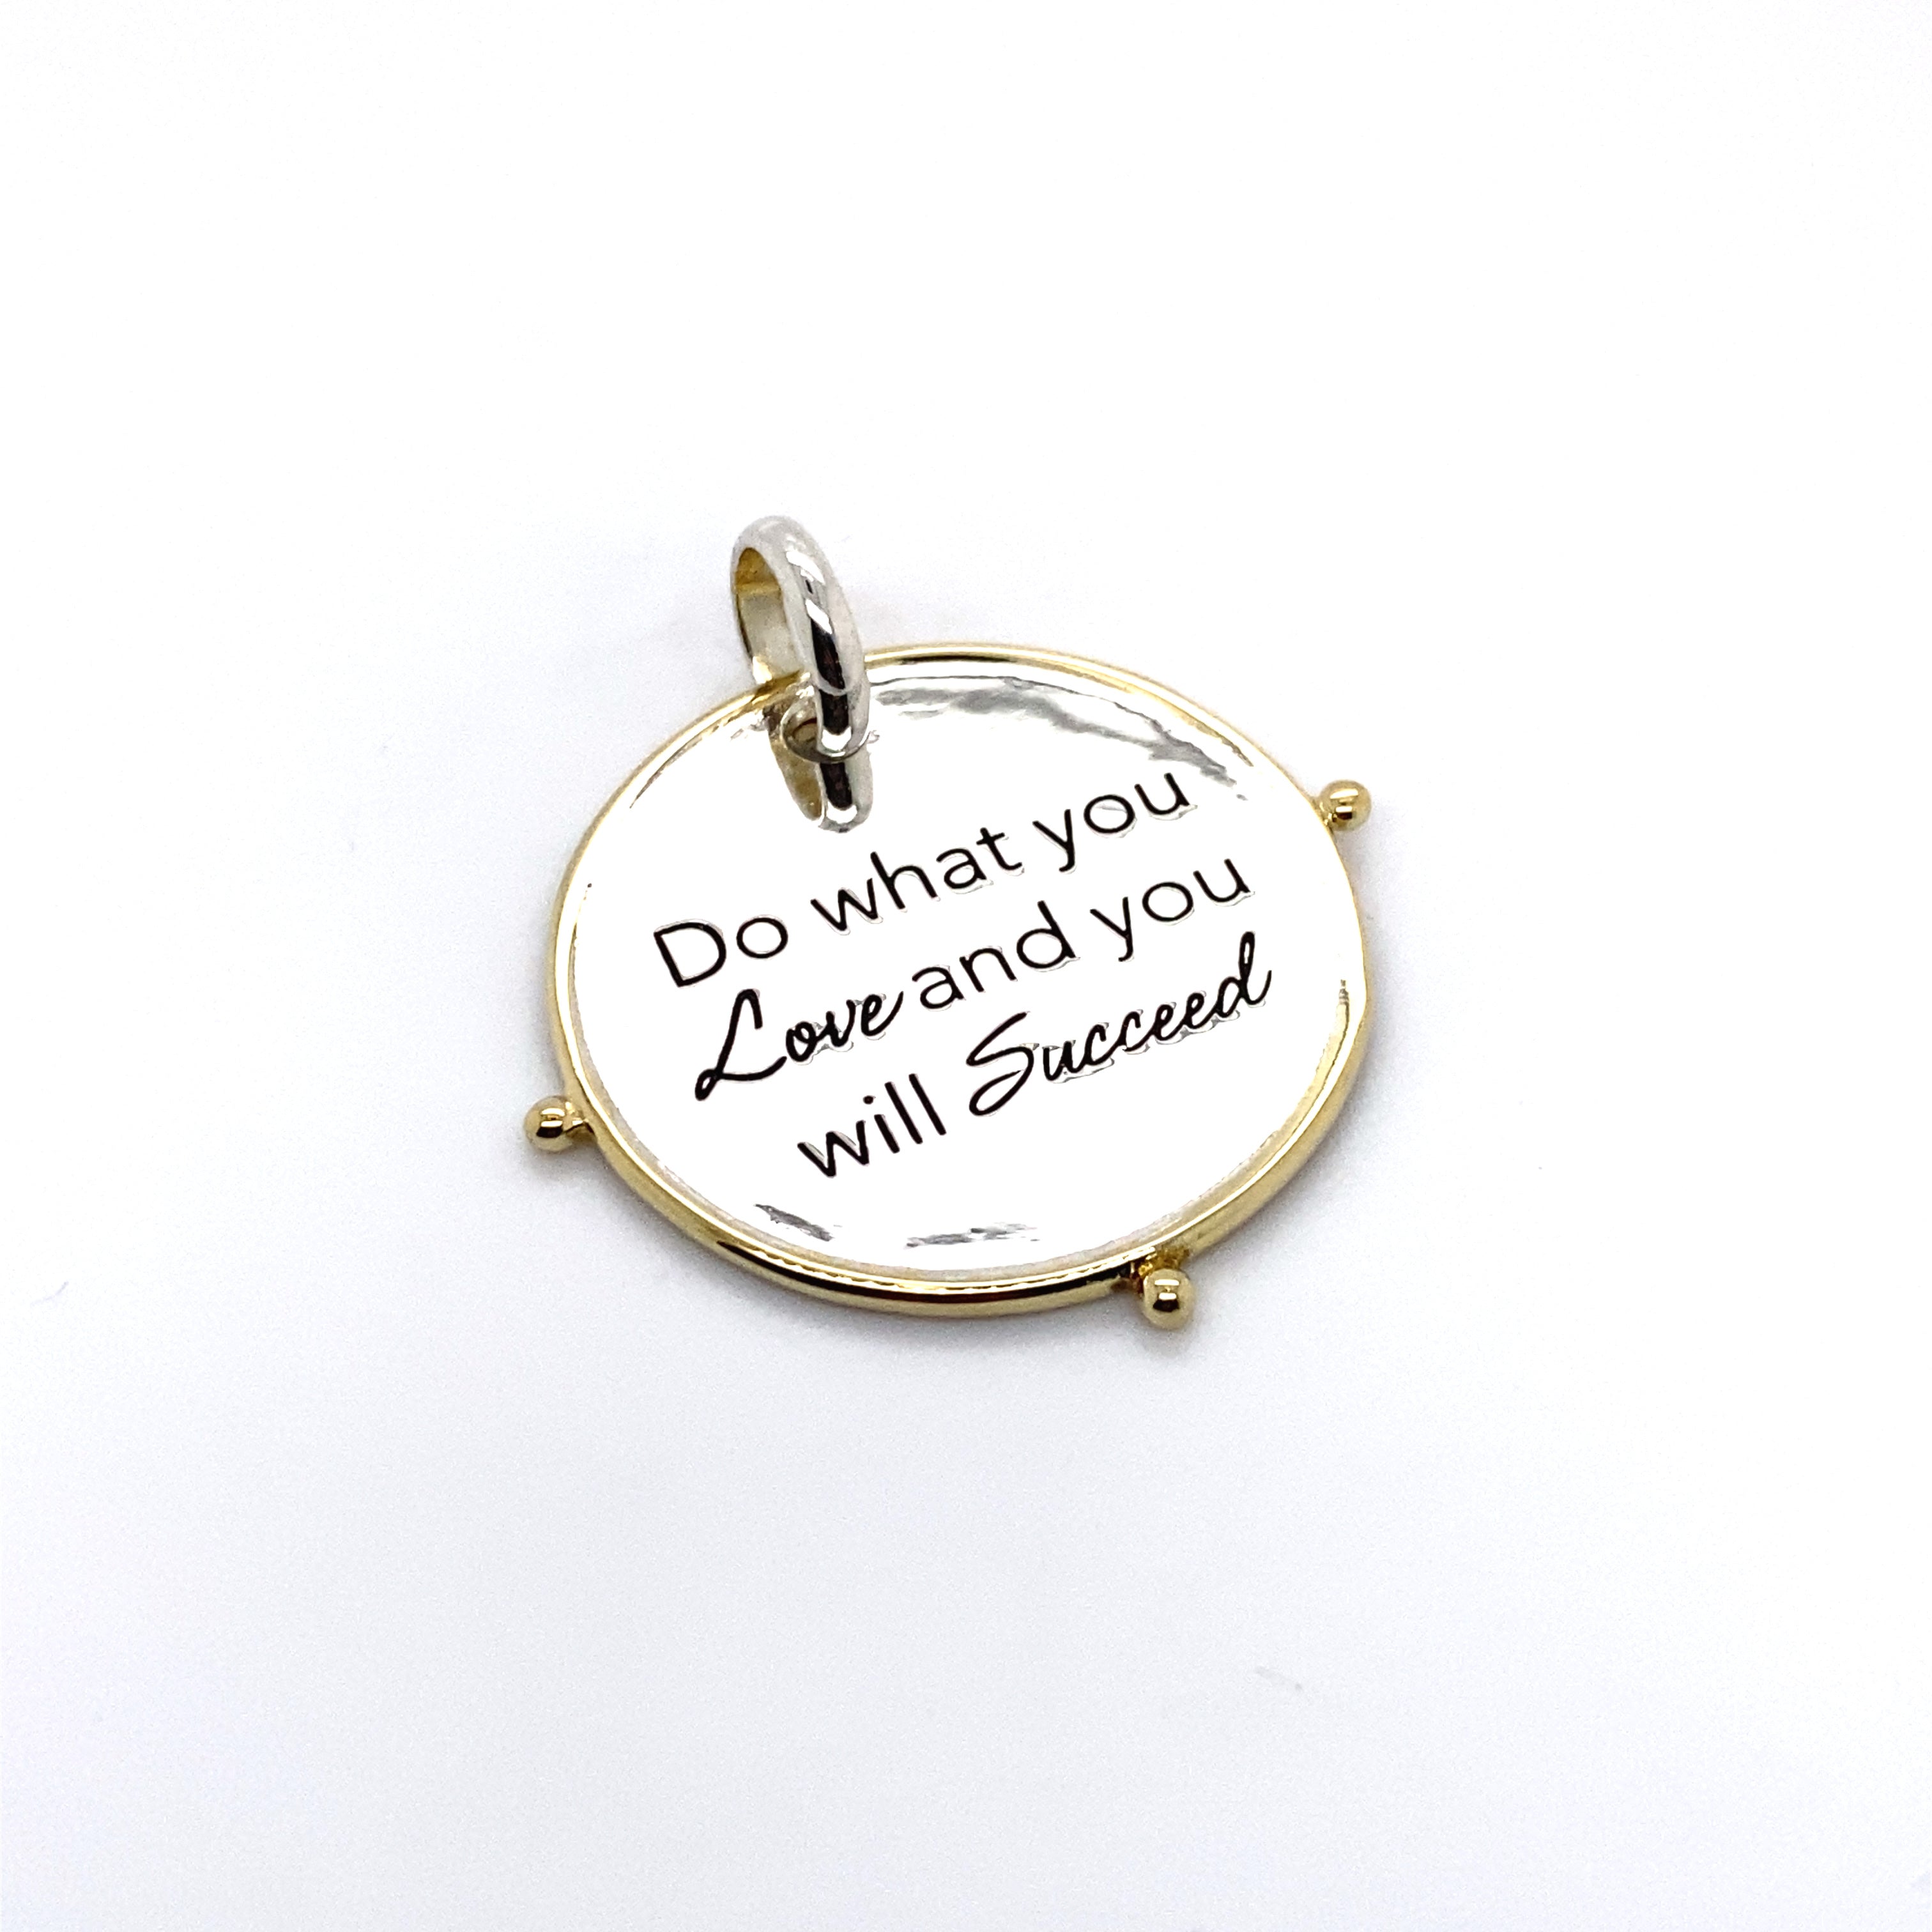 do what you love and you will succeed pendant charm